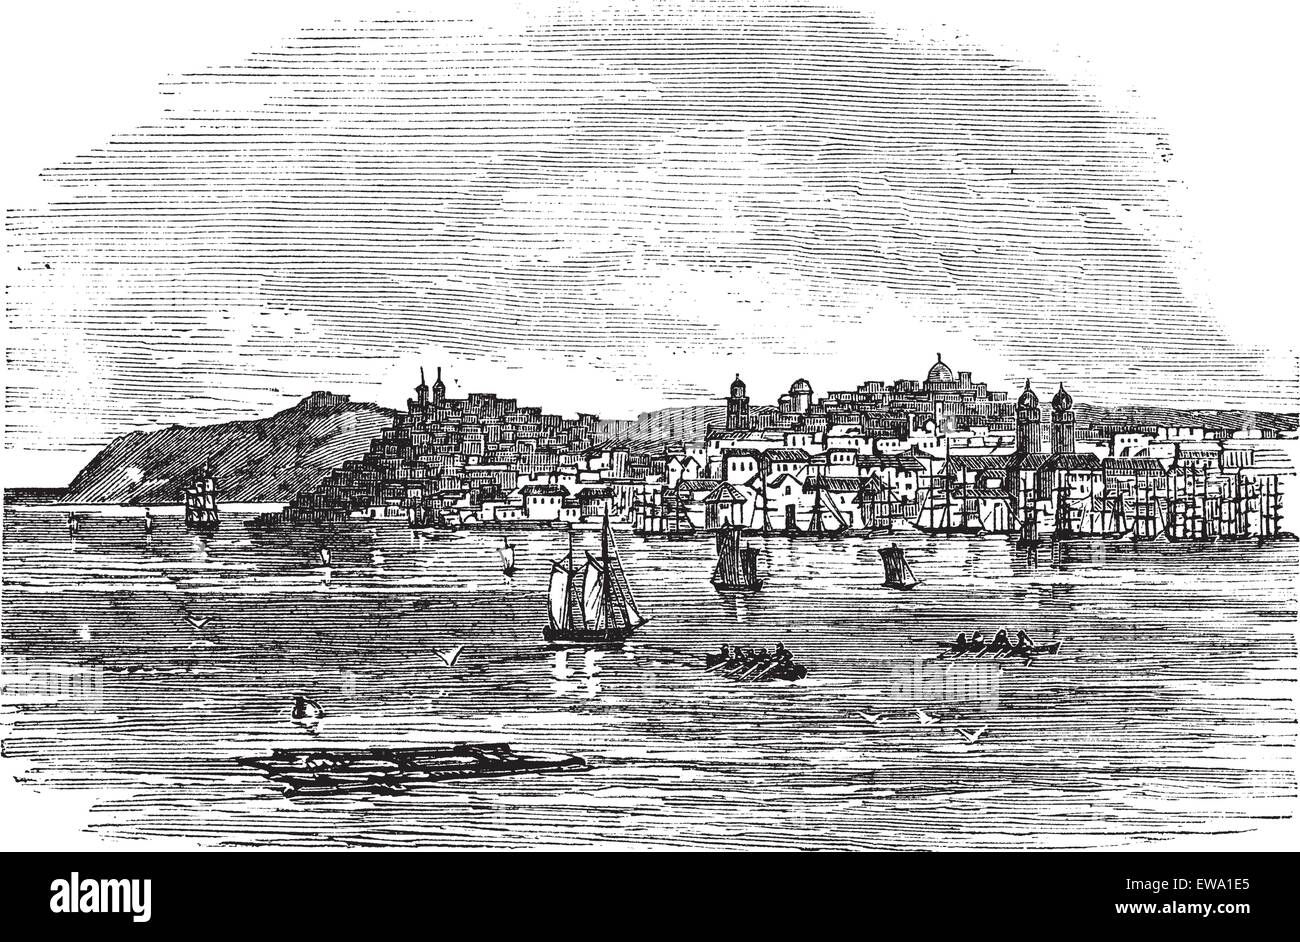 Galati in Romania, during the 1890s, vintage engraving. Old engraved illustration of Galati with moving boats in front and city in back. Stock Vector